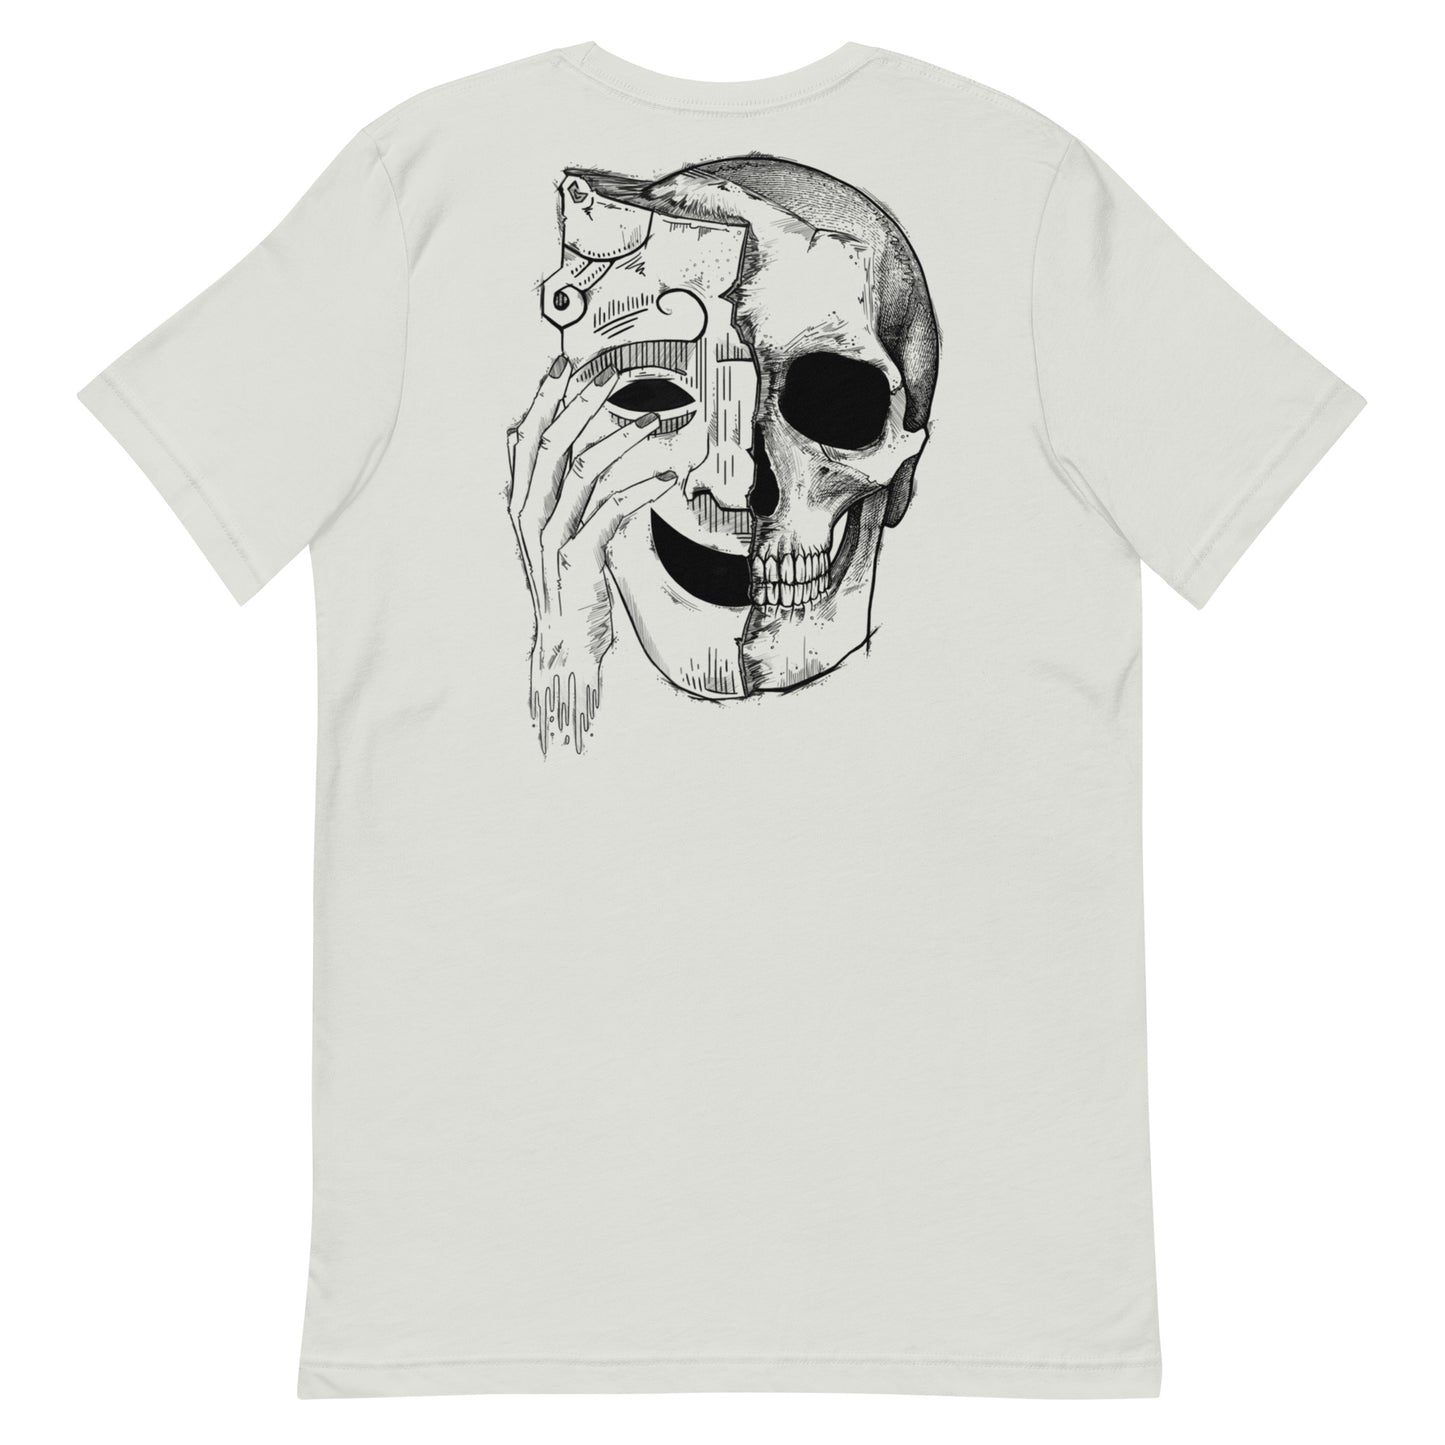 Products We All Wear Masks T-Shirt Silver Back